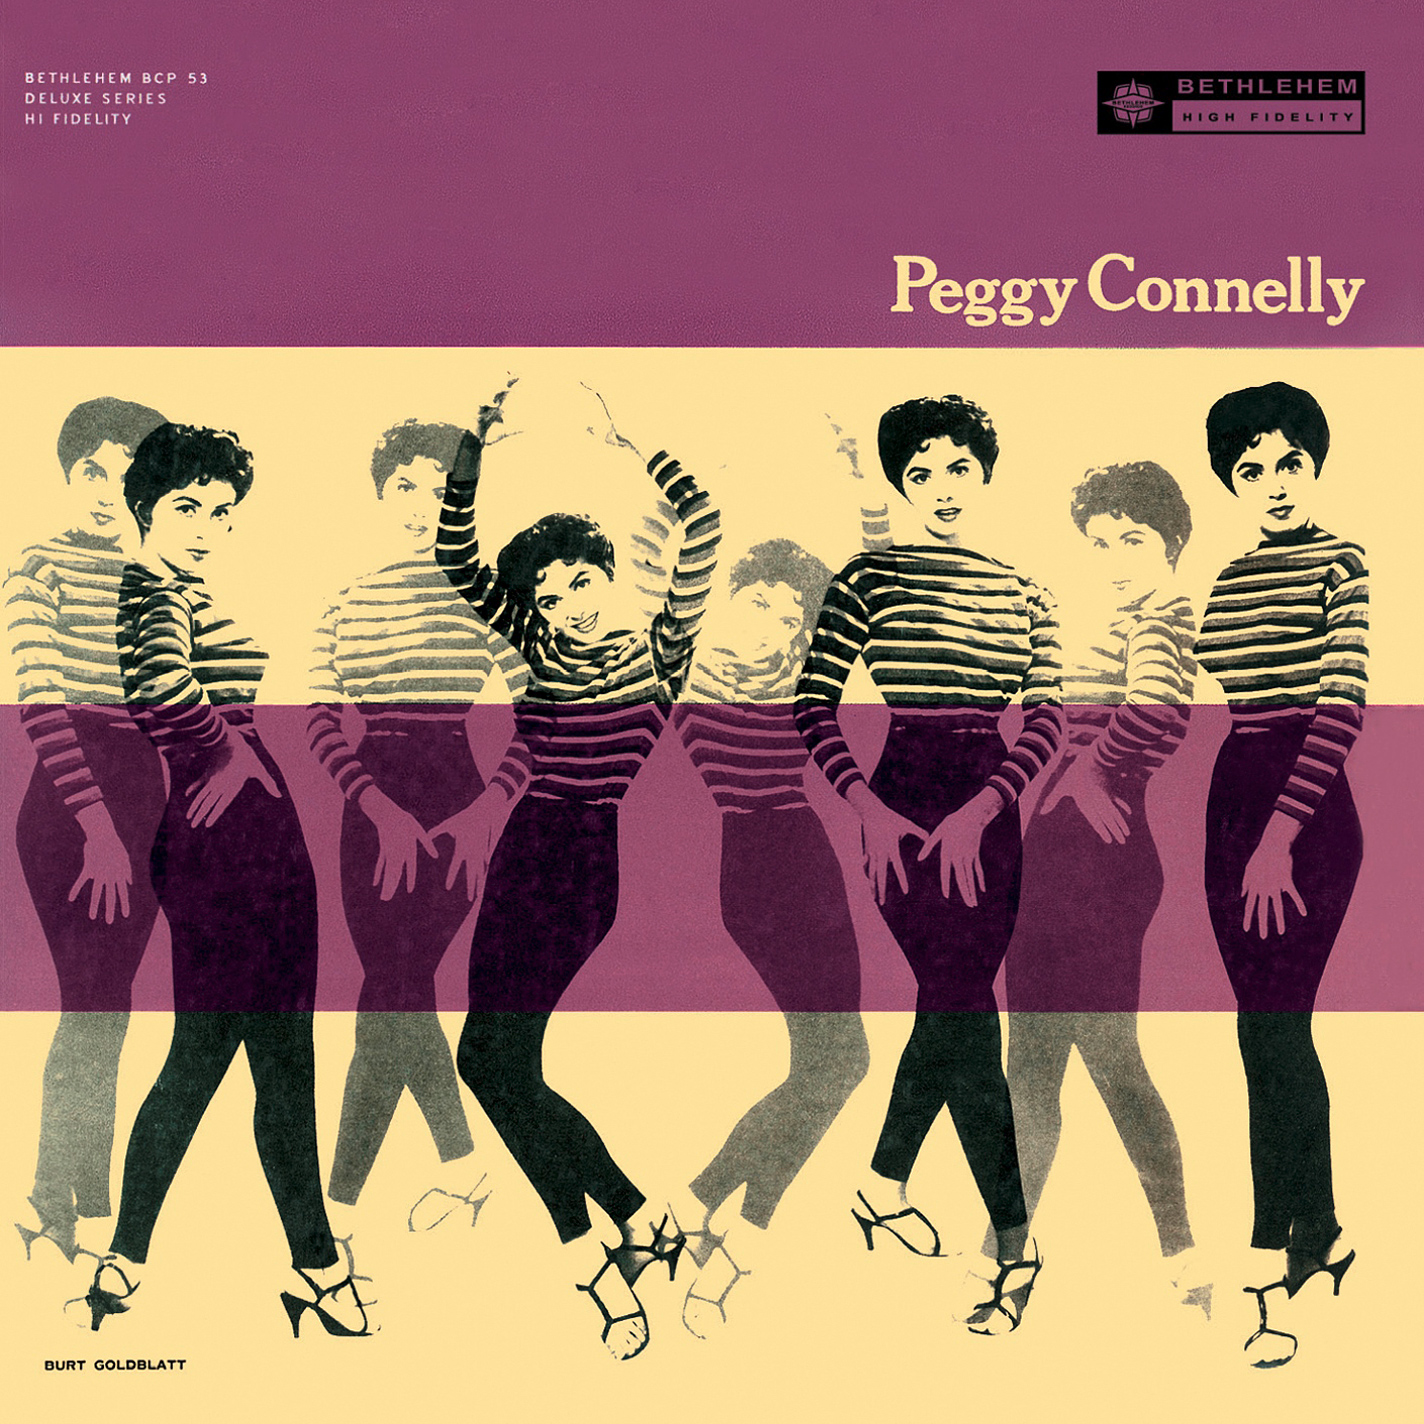 Peggy Connelly - That Old Black Magic (1956/2014) [PrestoClassical FLAC 24bit/96kHz]